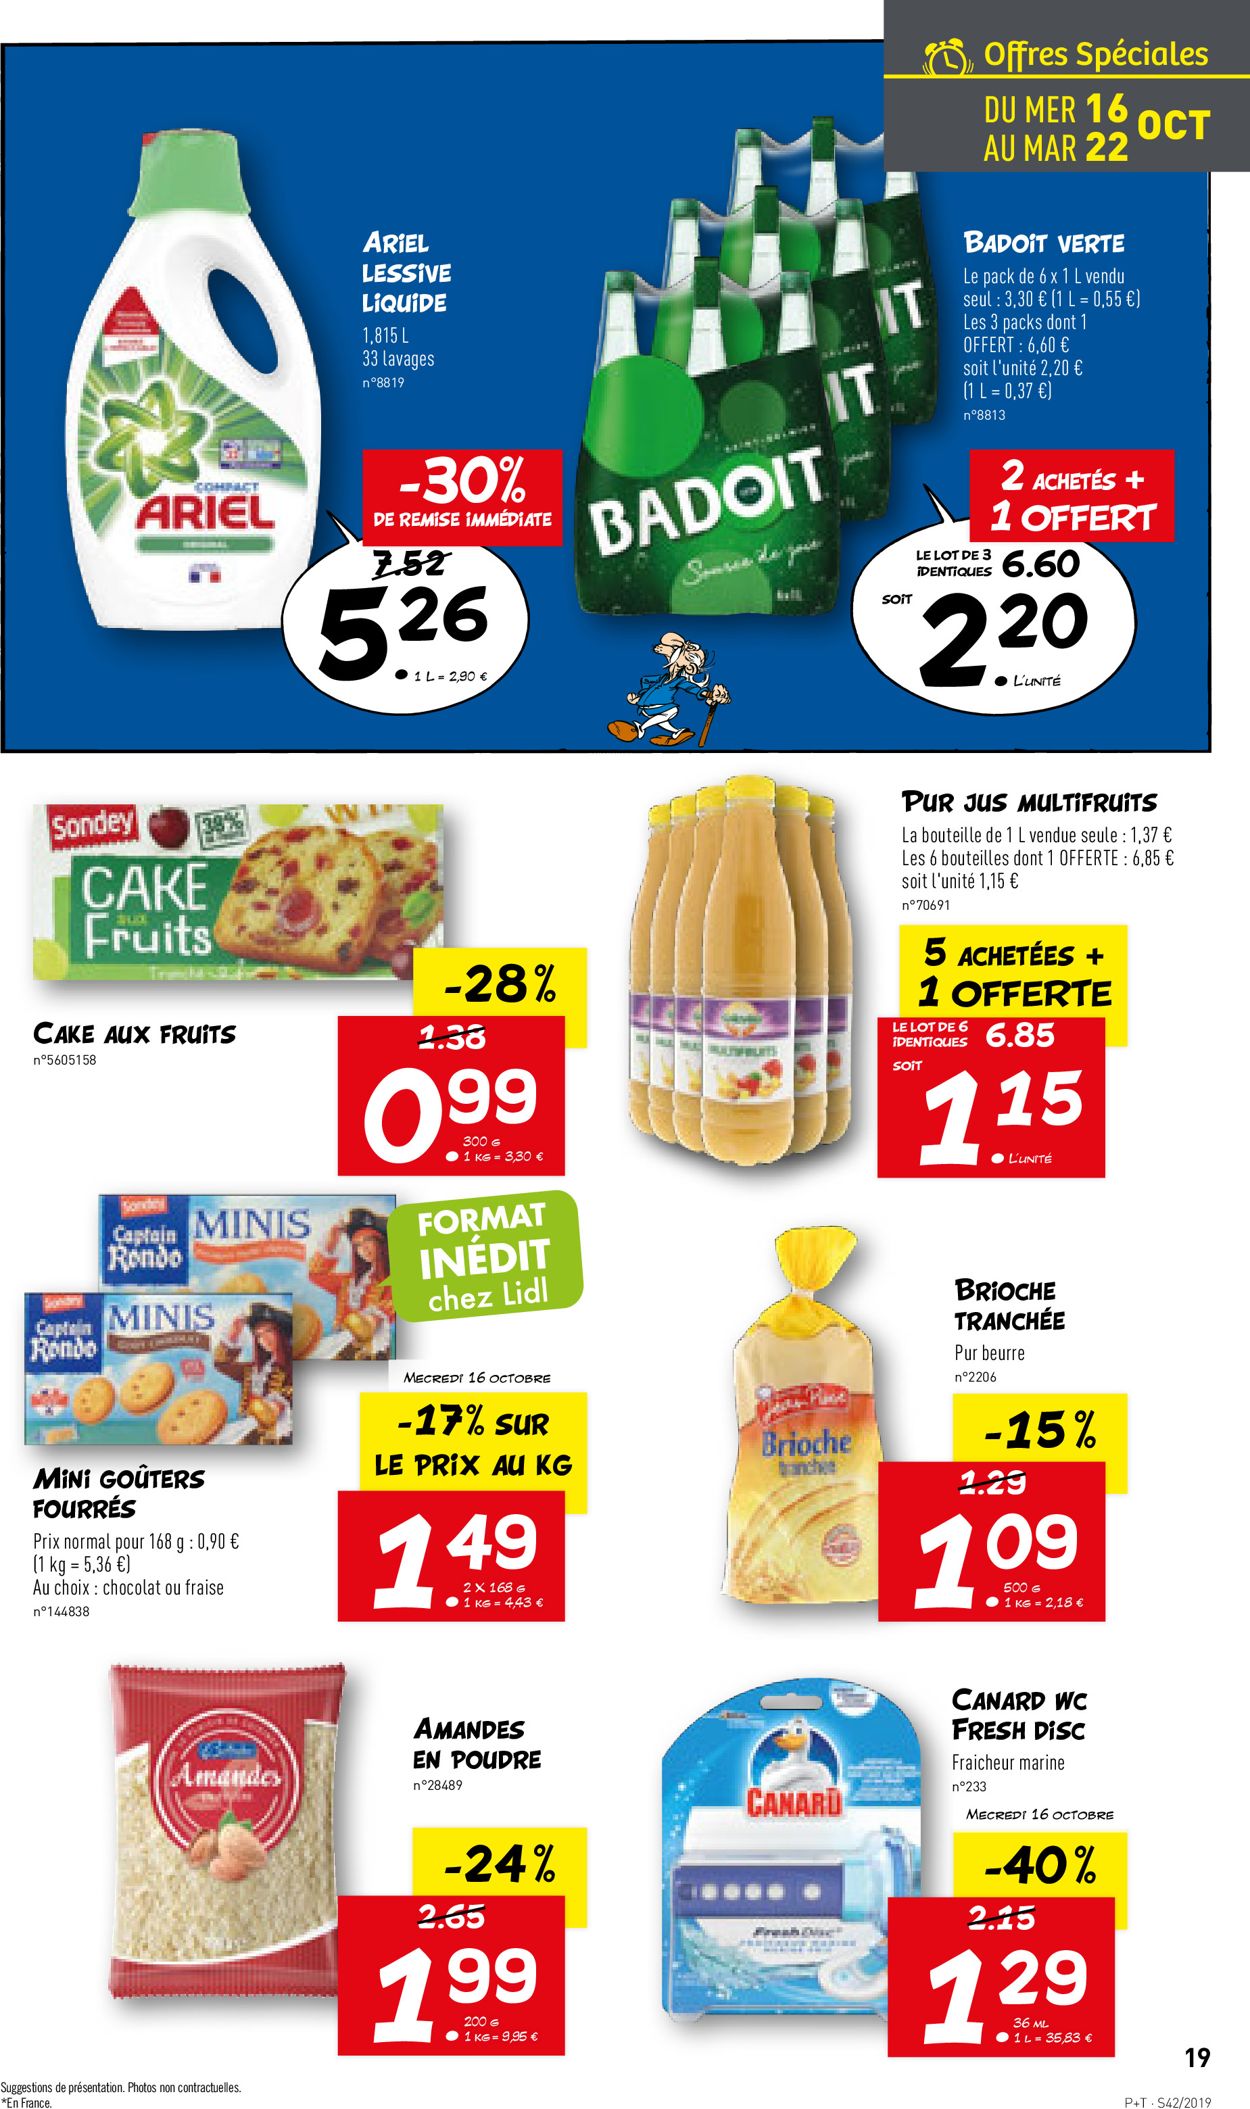 Lidl Catalogue - 16.10-22.10.2019 (Page 19)